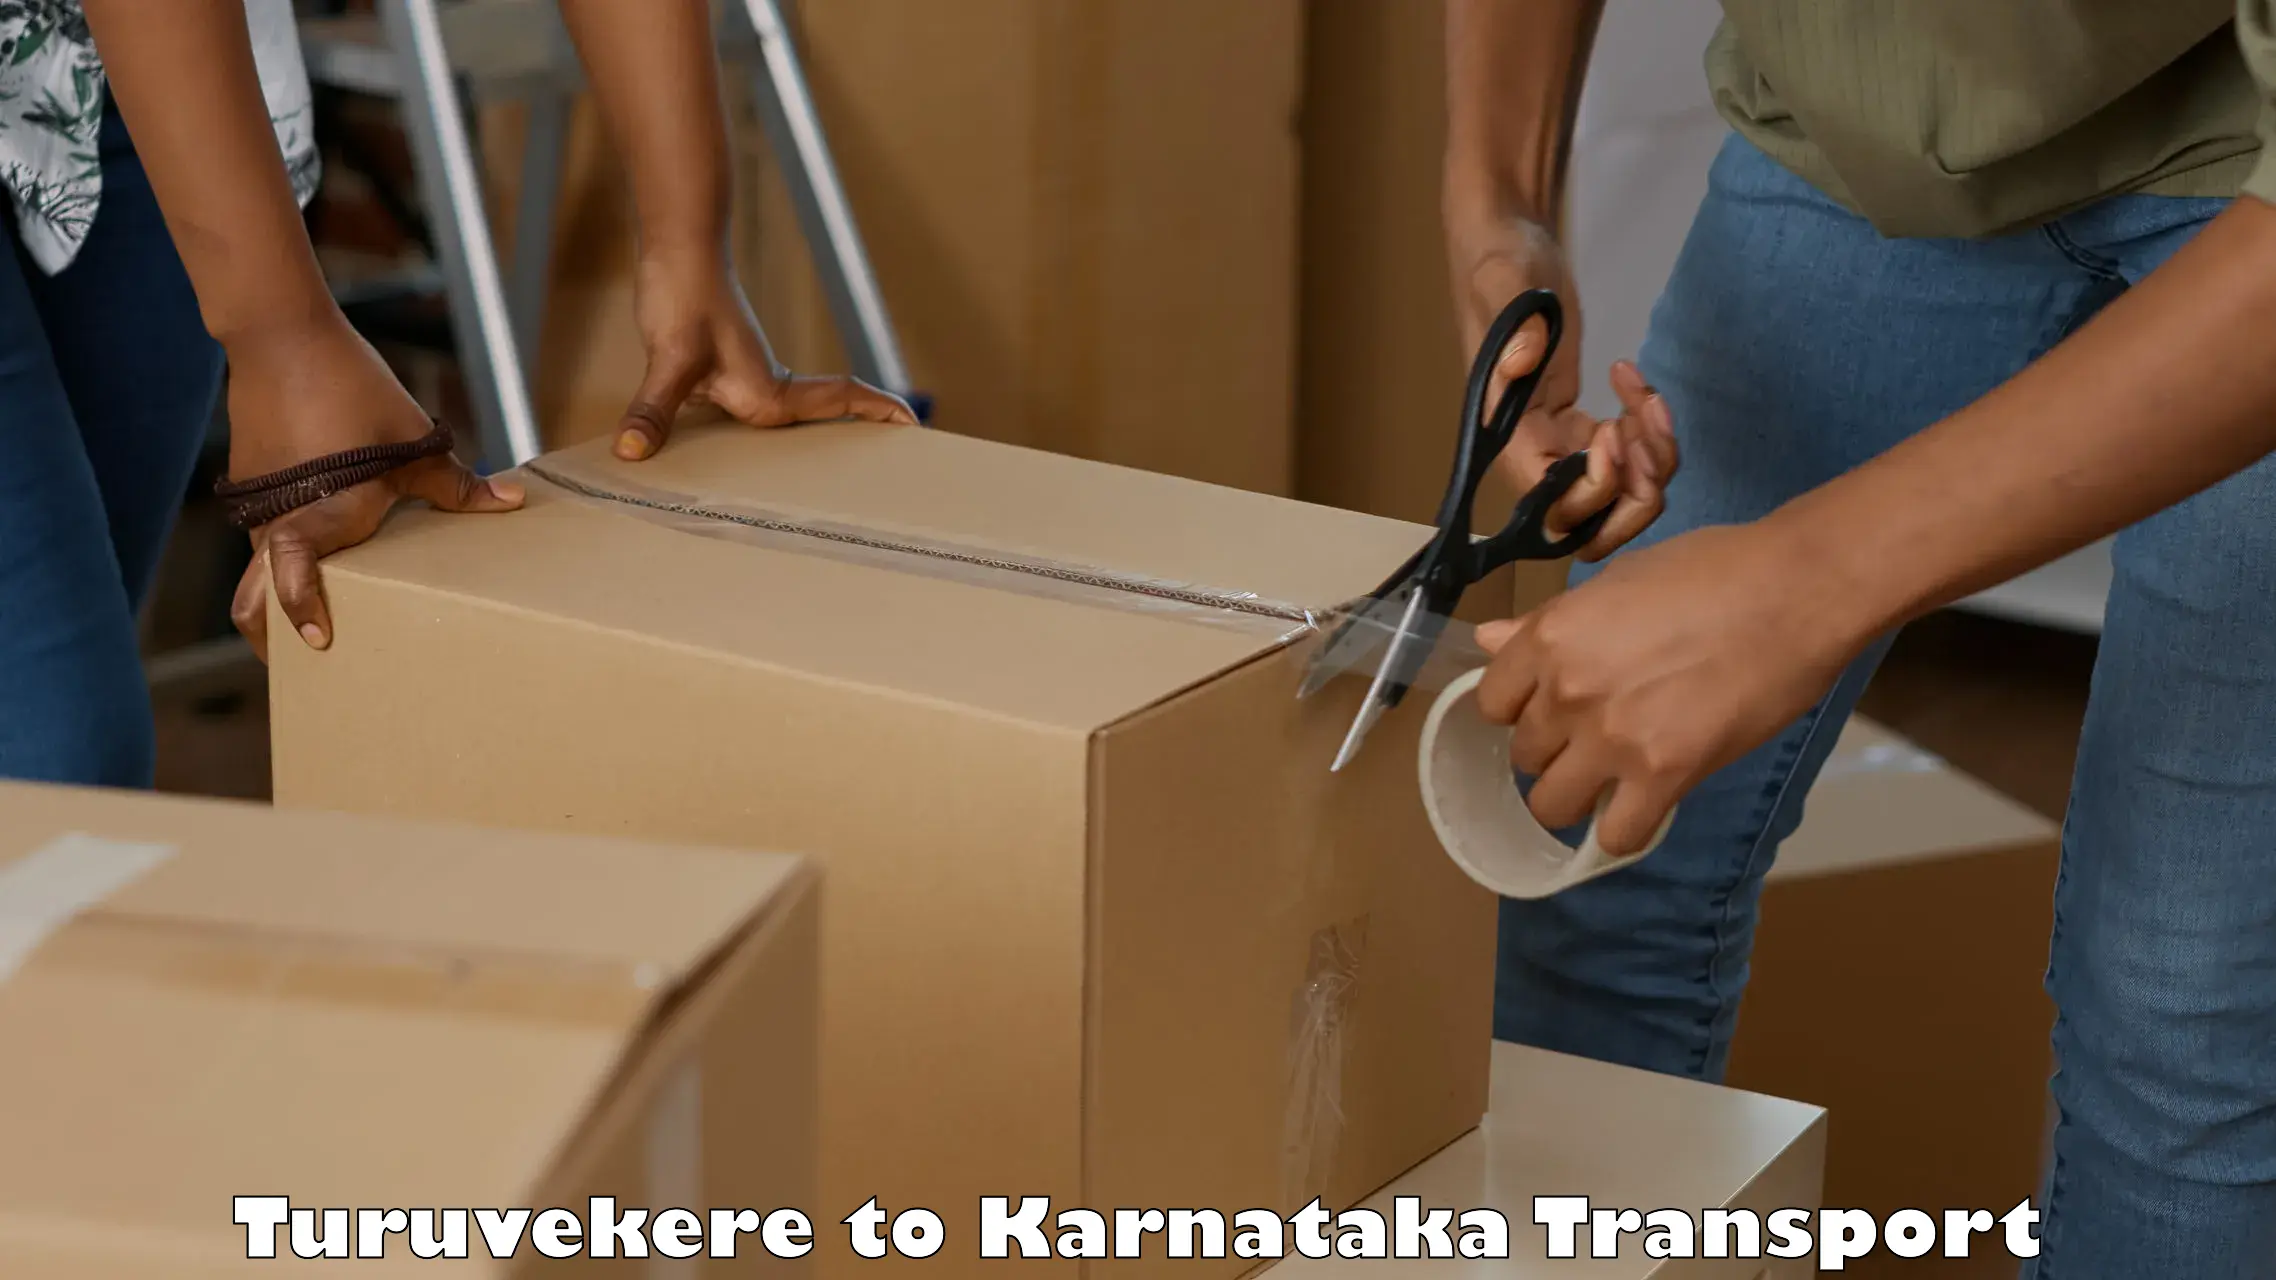 Delivery service Turuvekere to Bhatkal